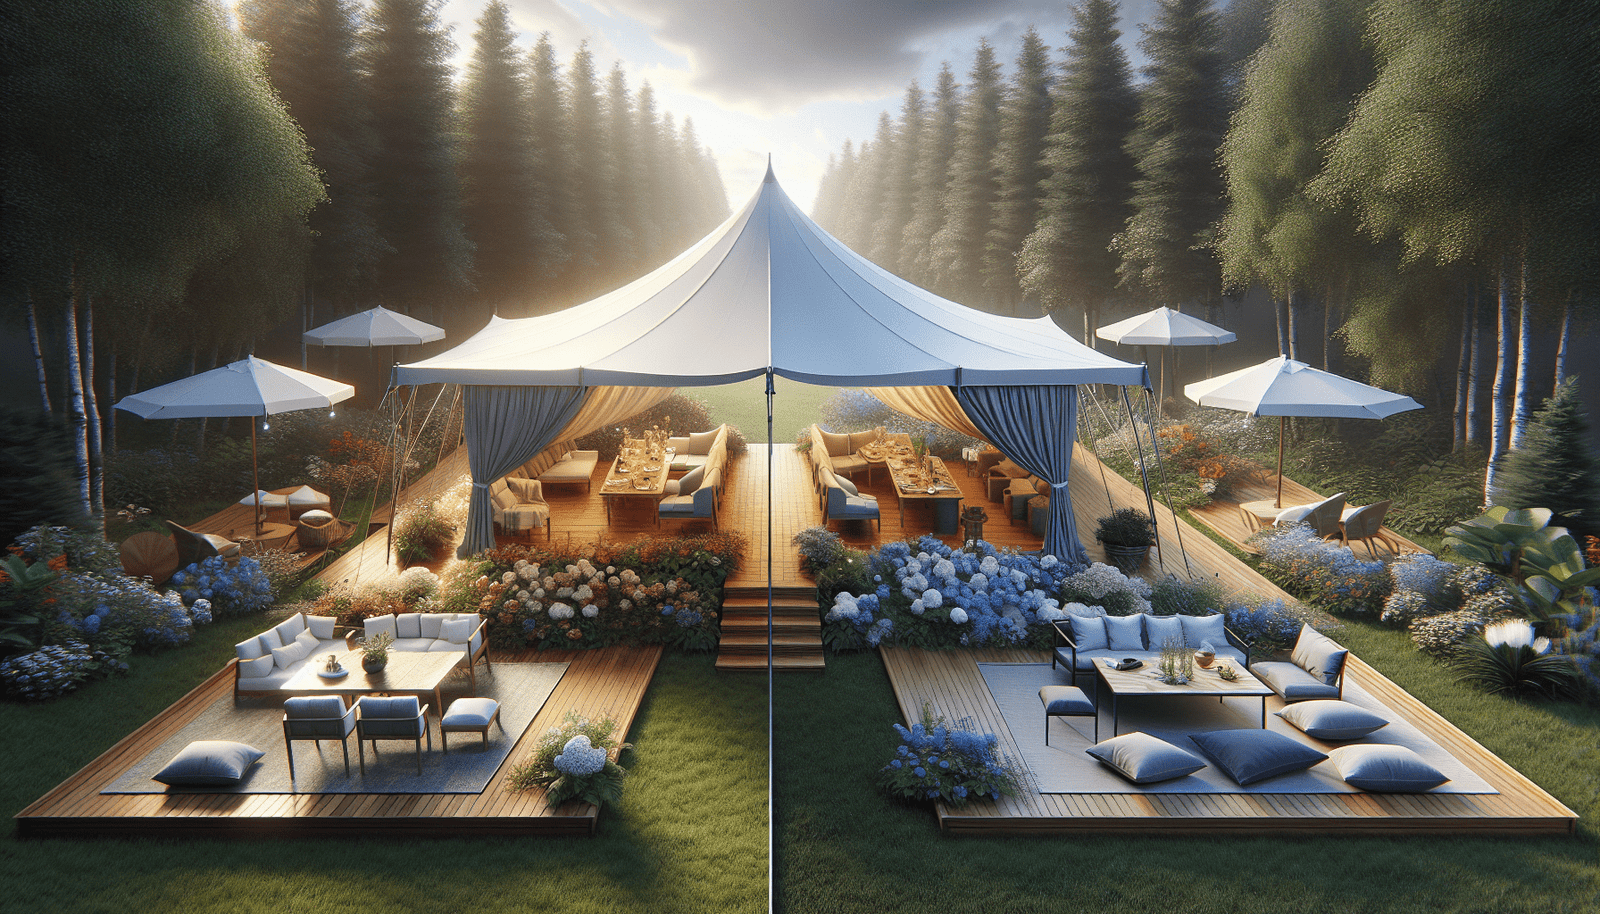 What Are The Differences Between A Pop-up Canopy And A Traditional Canopy Tent?